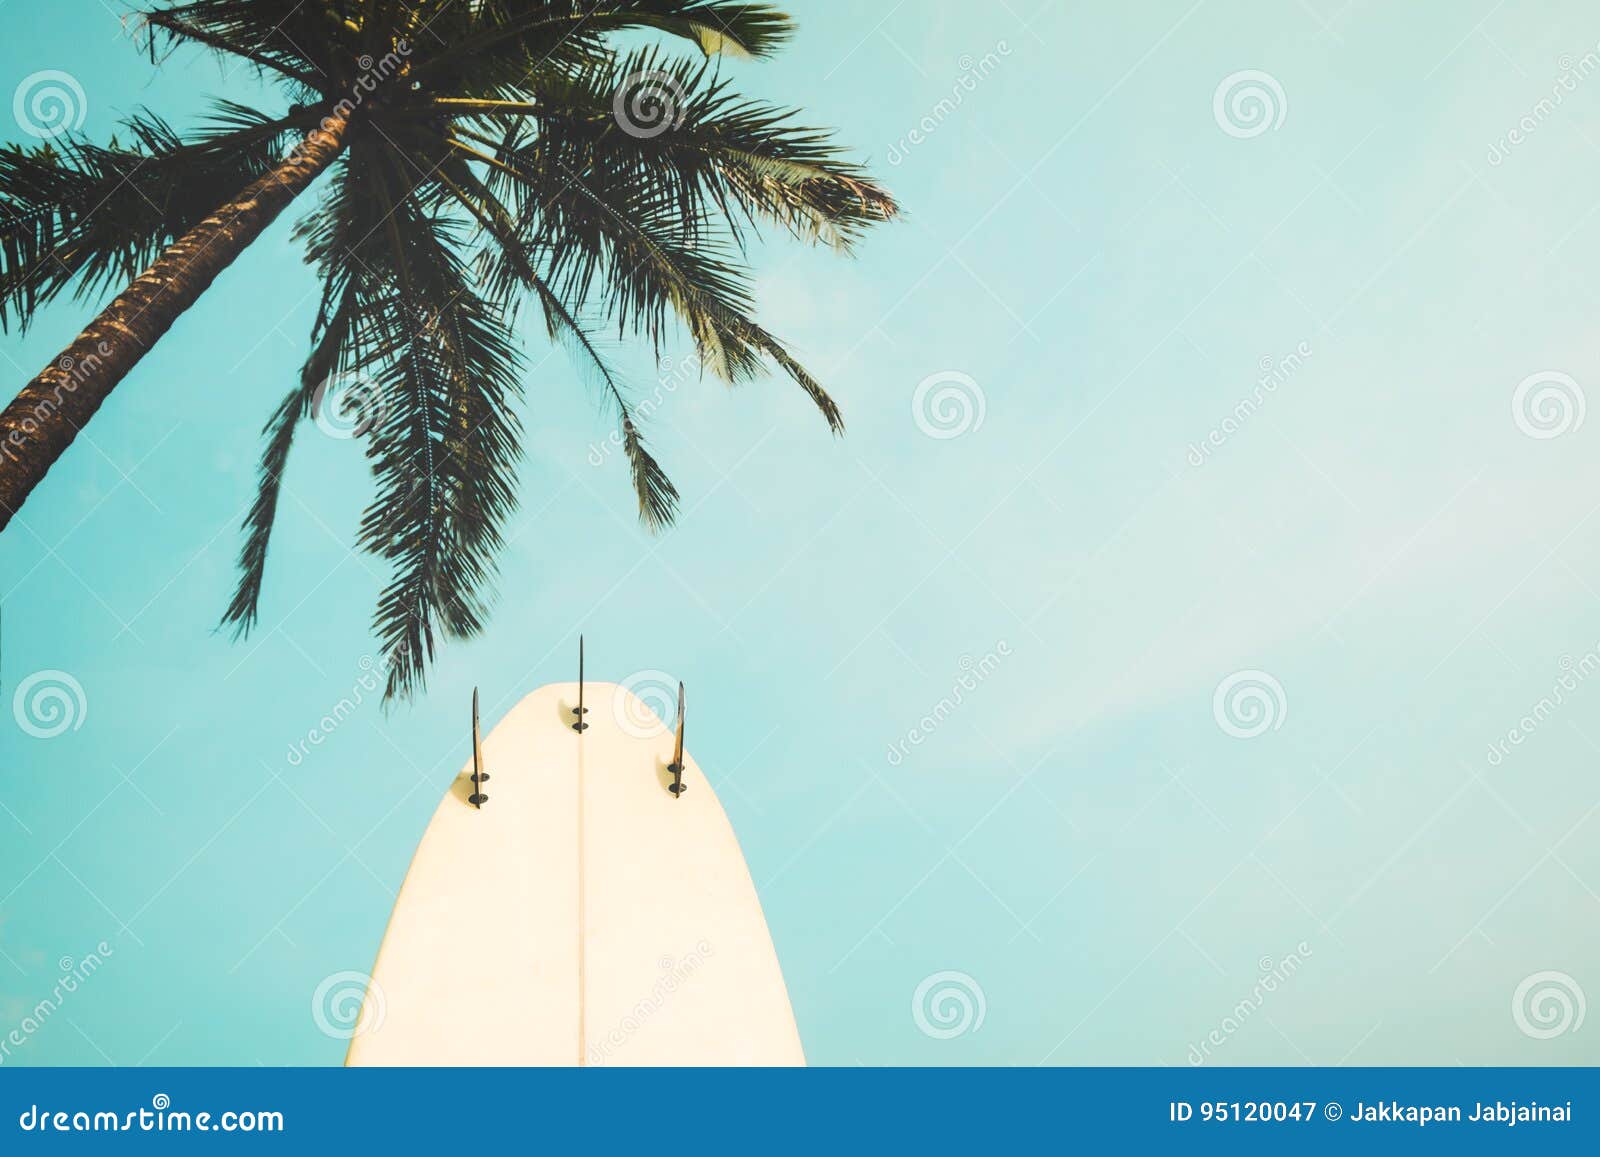 surf board with palm tree in summer season